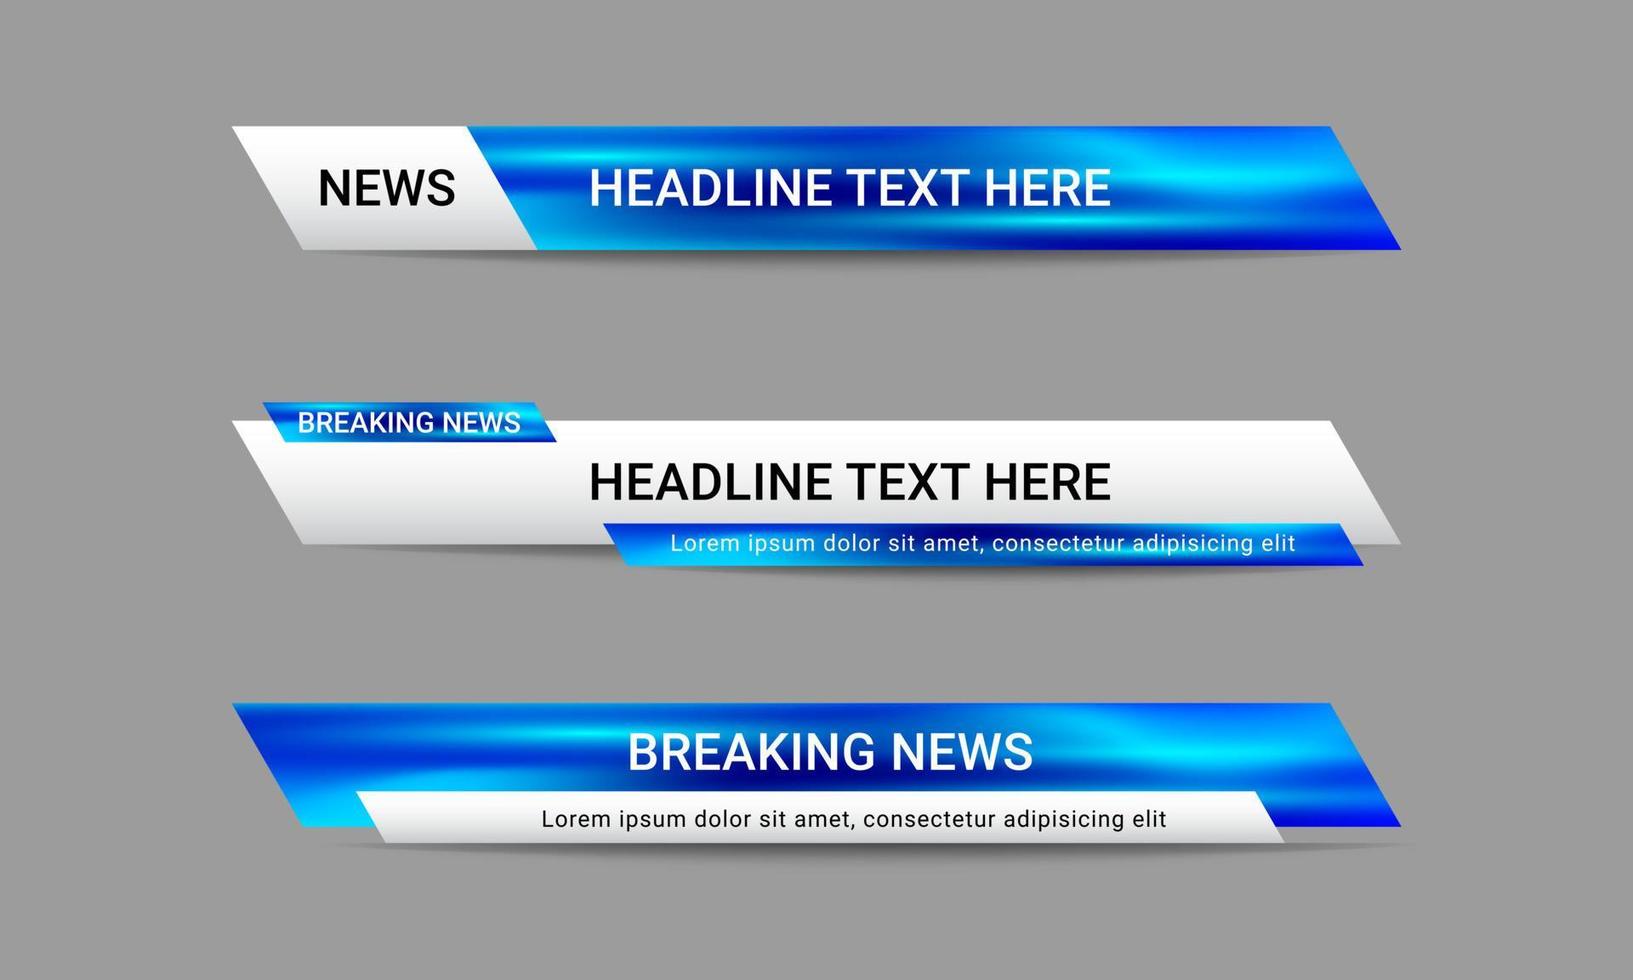 Set of broadcast news lower third banner templates for Television, Video and Media Channels. Futuristic headline bar layout design vector